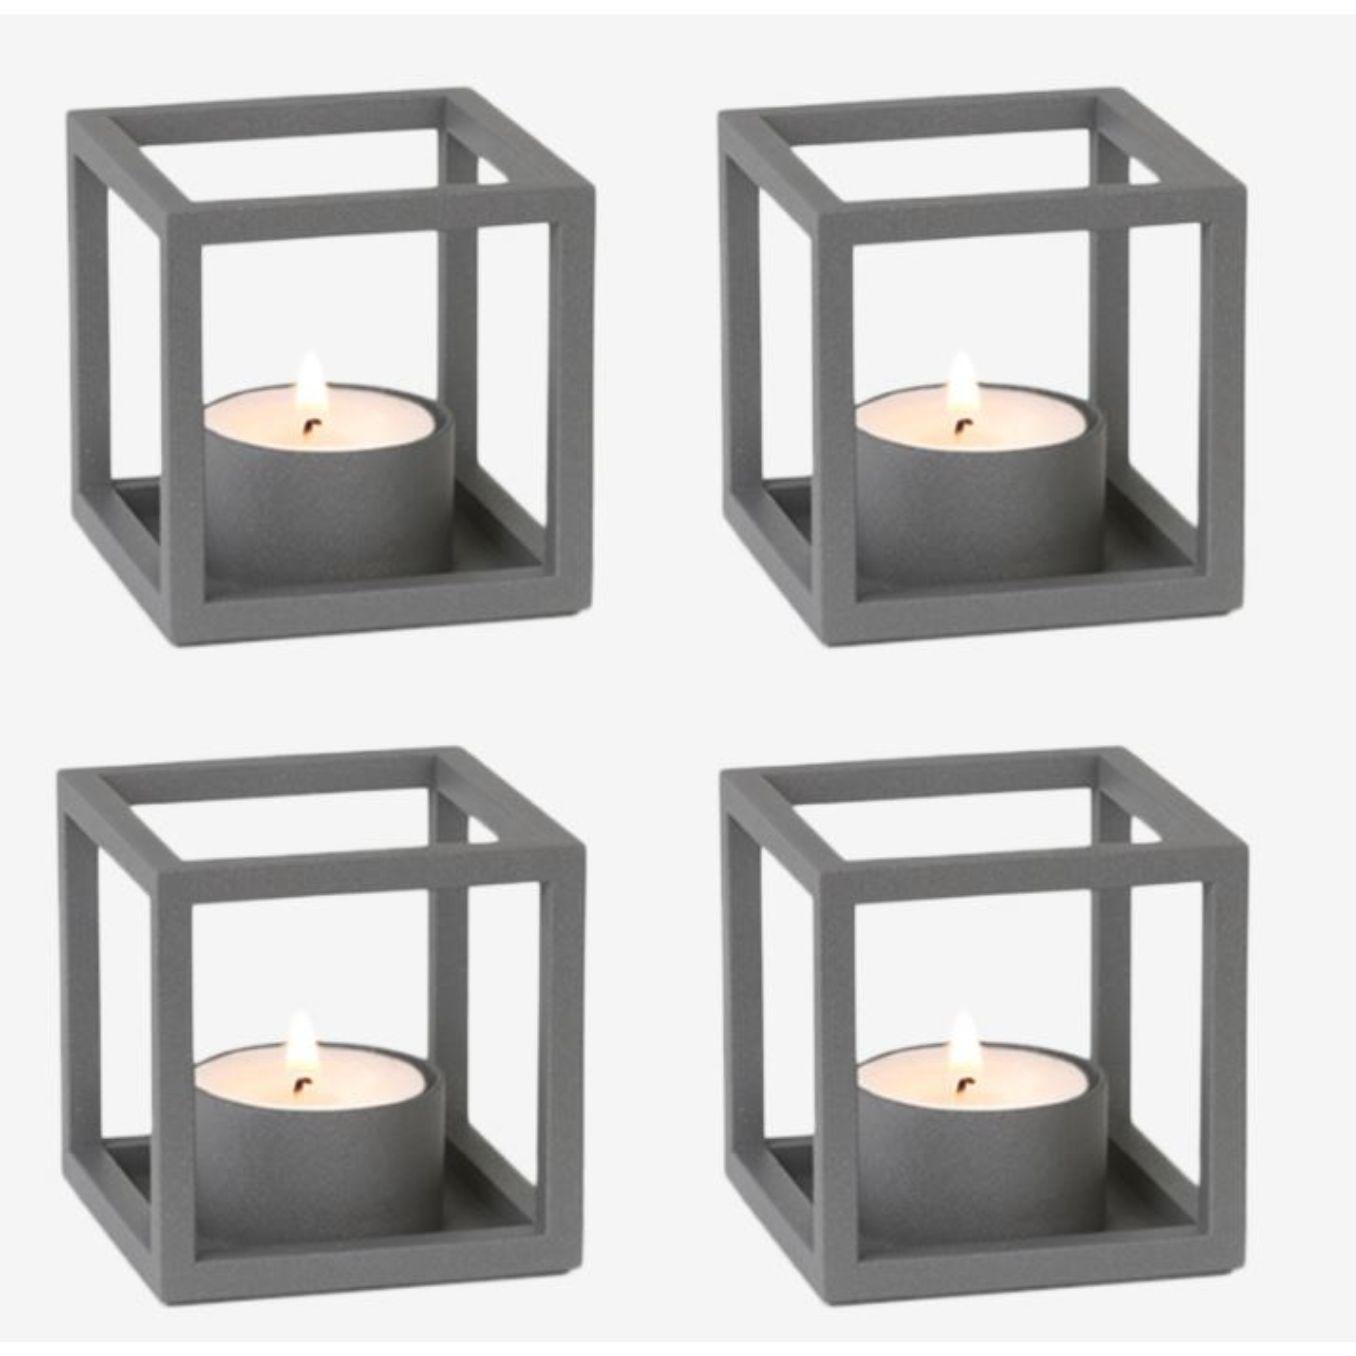 Set of 4 grey Kubus T candle holders by Lassen
Dimensions: D 7 x W 7 x H 7 cm 
Materials: Metal 
Also available in different dimensions and colors.
Weight: 0.40 Kg

The tealight, Kubus T, is added to the Kubus collection in 2018, designed by